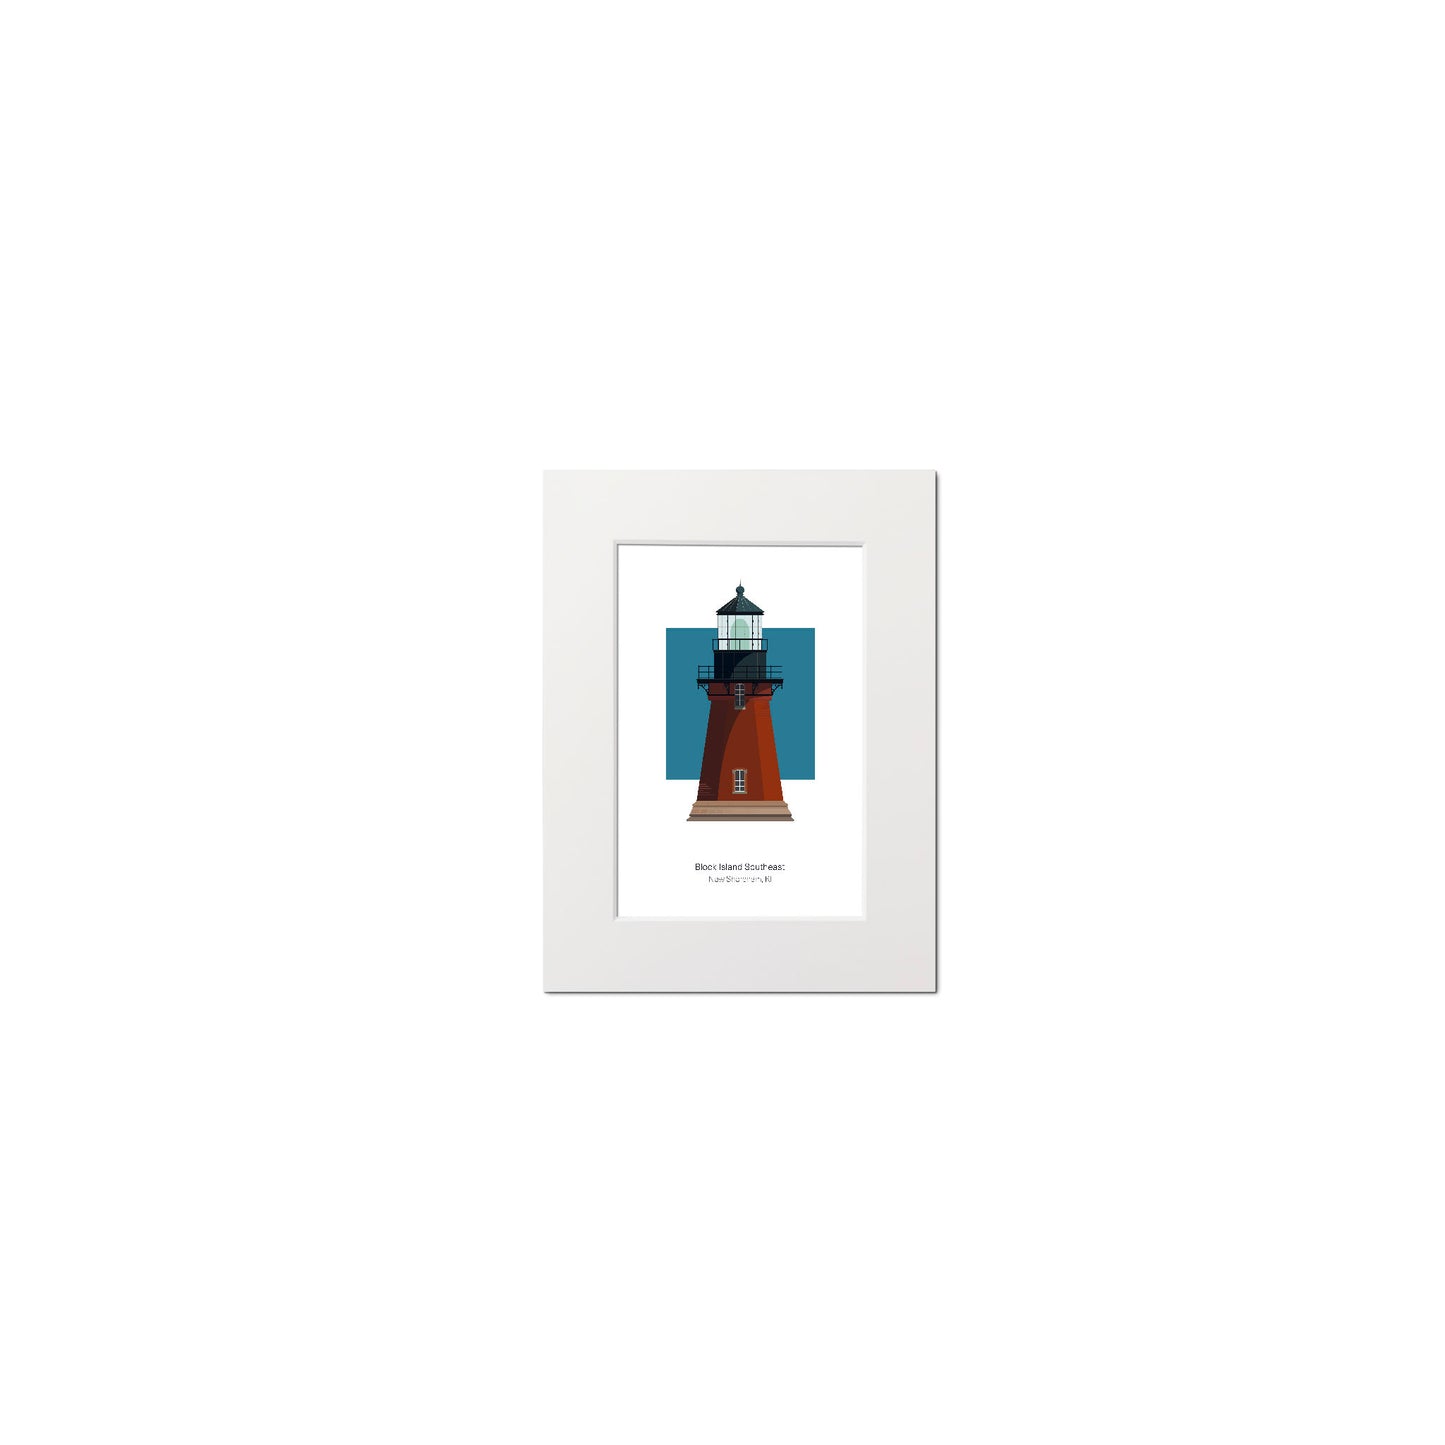 Illustration of the Block Island Southeast lighthouse, Rhode Island, USA. On a white background with aqua blue square as a backdrop., mounted and measuring 6"x8" (15x20cm).